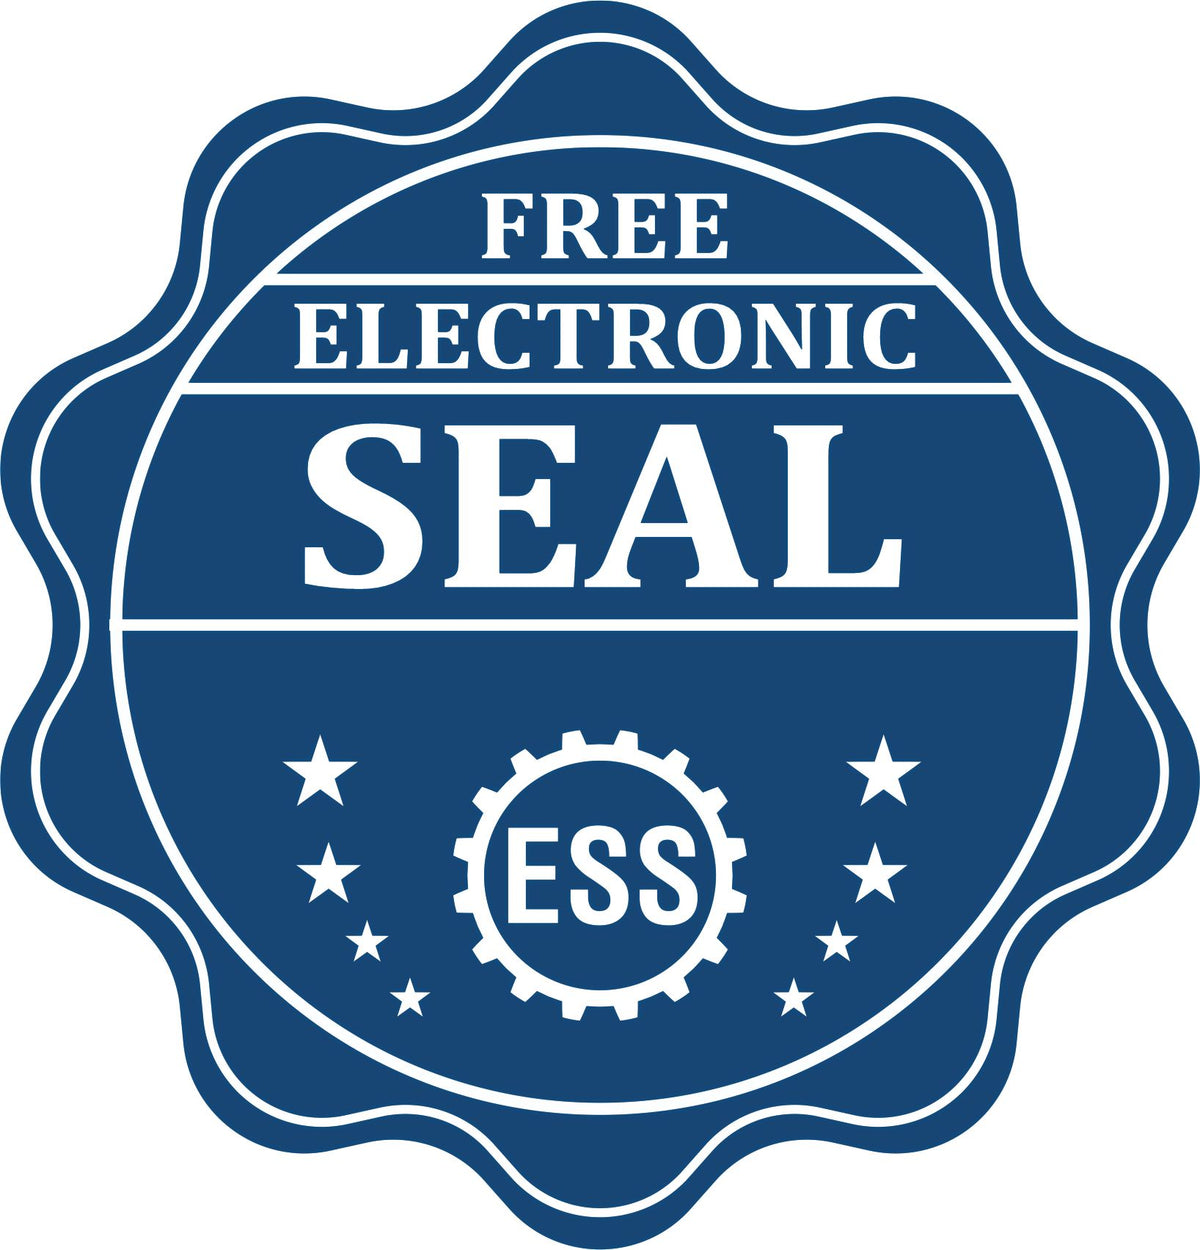 A badge showing a free electronic seal for the Handheld Nevada Professional Engineer Embosser with stars and the ESS gear on the emblem.